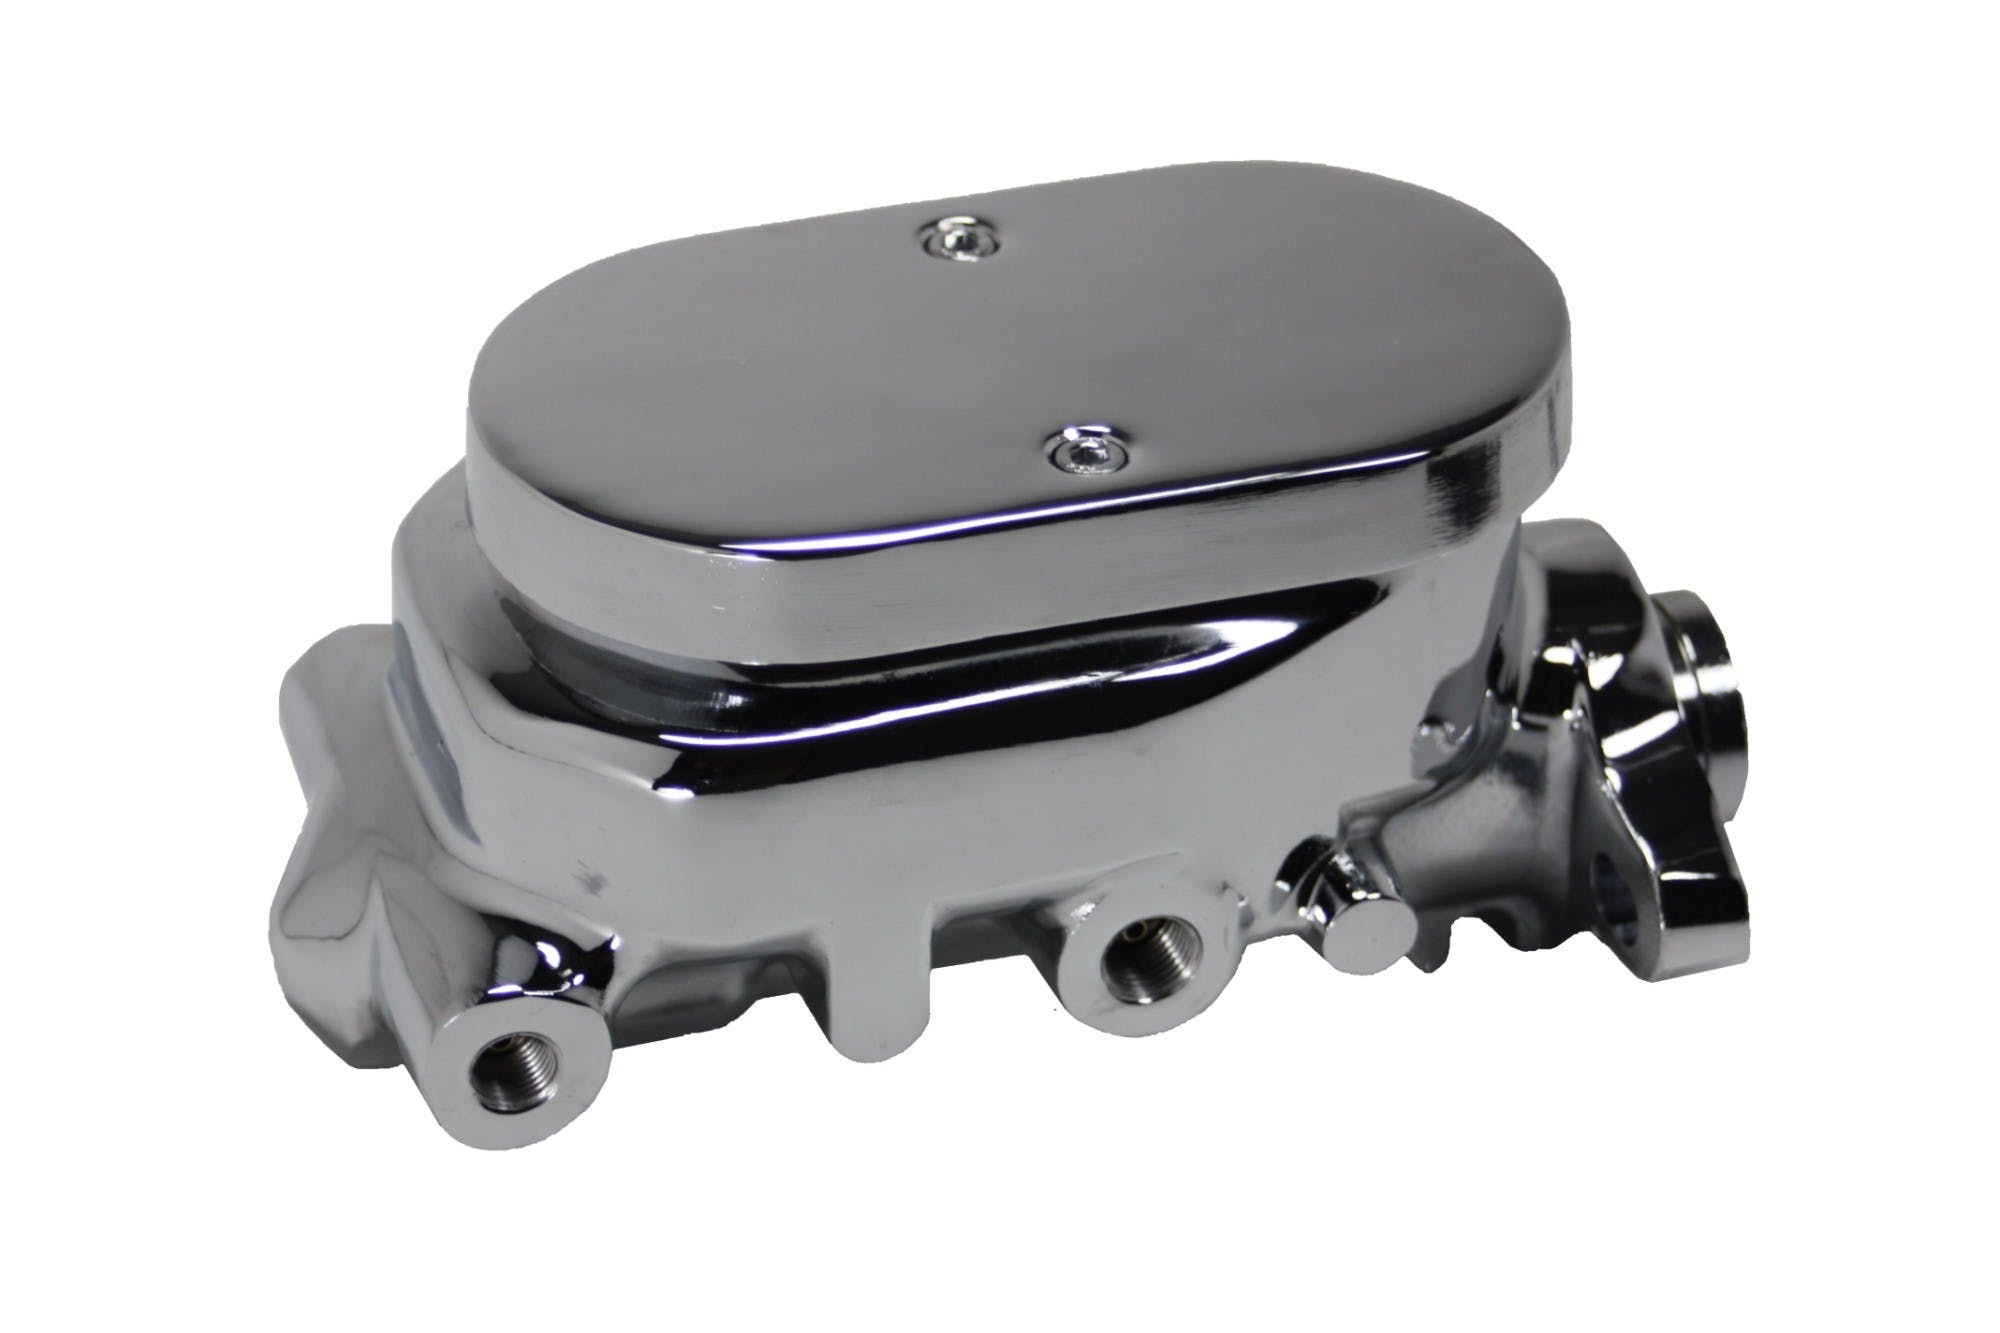 LEED Brakes PBKT1021 7 inch Dual Chrome Booster